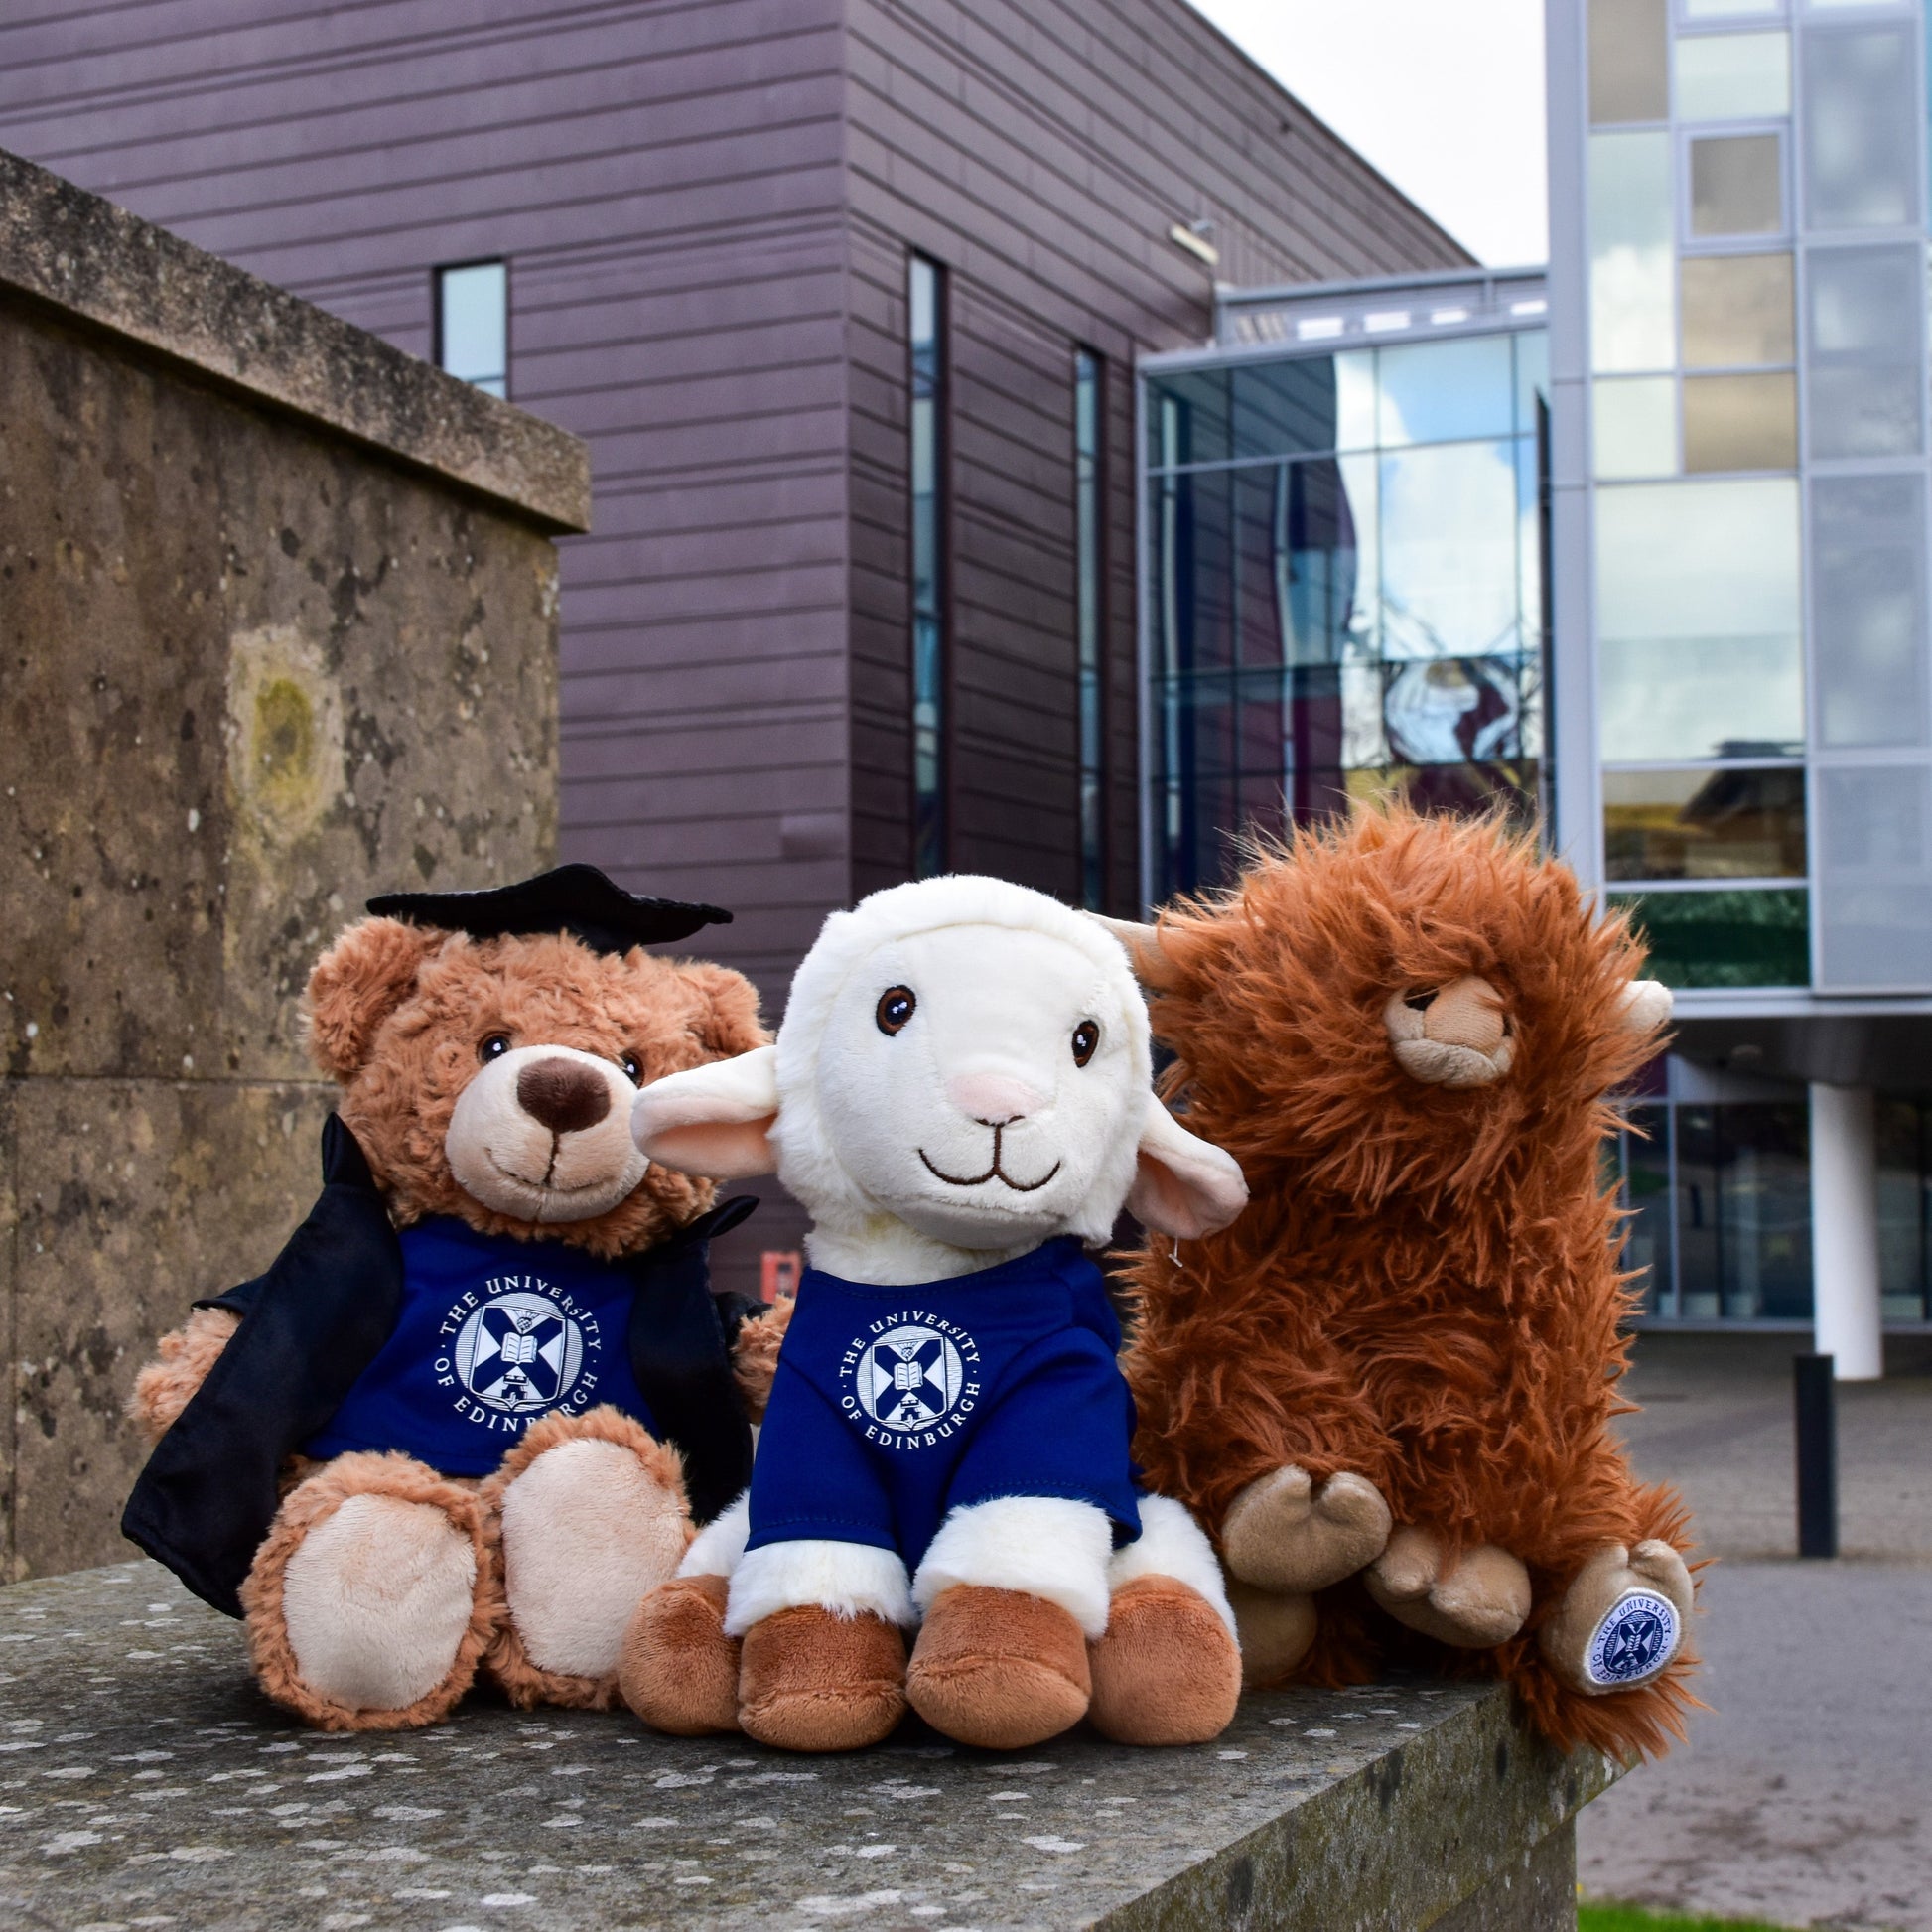 From left to right: Edinbear Recycled Plush, Dolly Recycled Plush, and McCoowan Recycled Plush sitting on a concrete bench in front of the Roslin Institute.